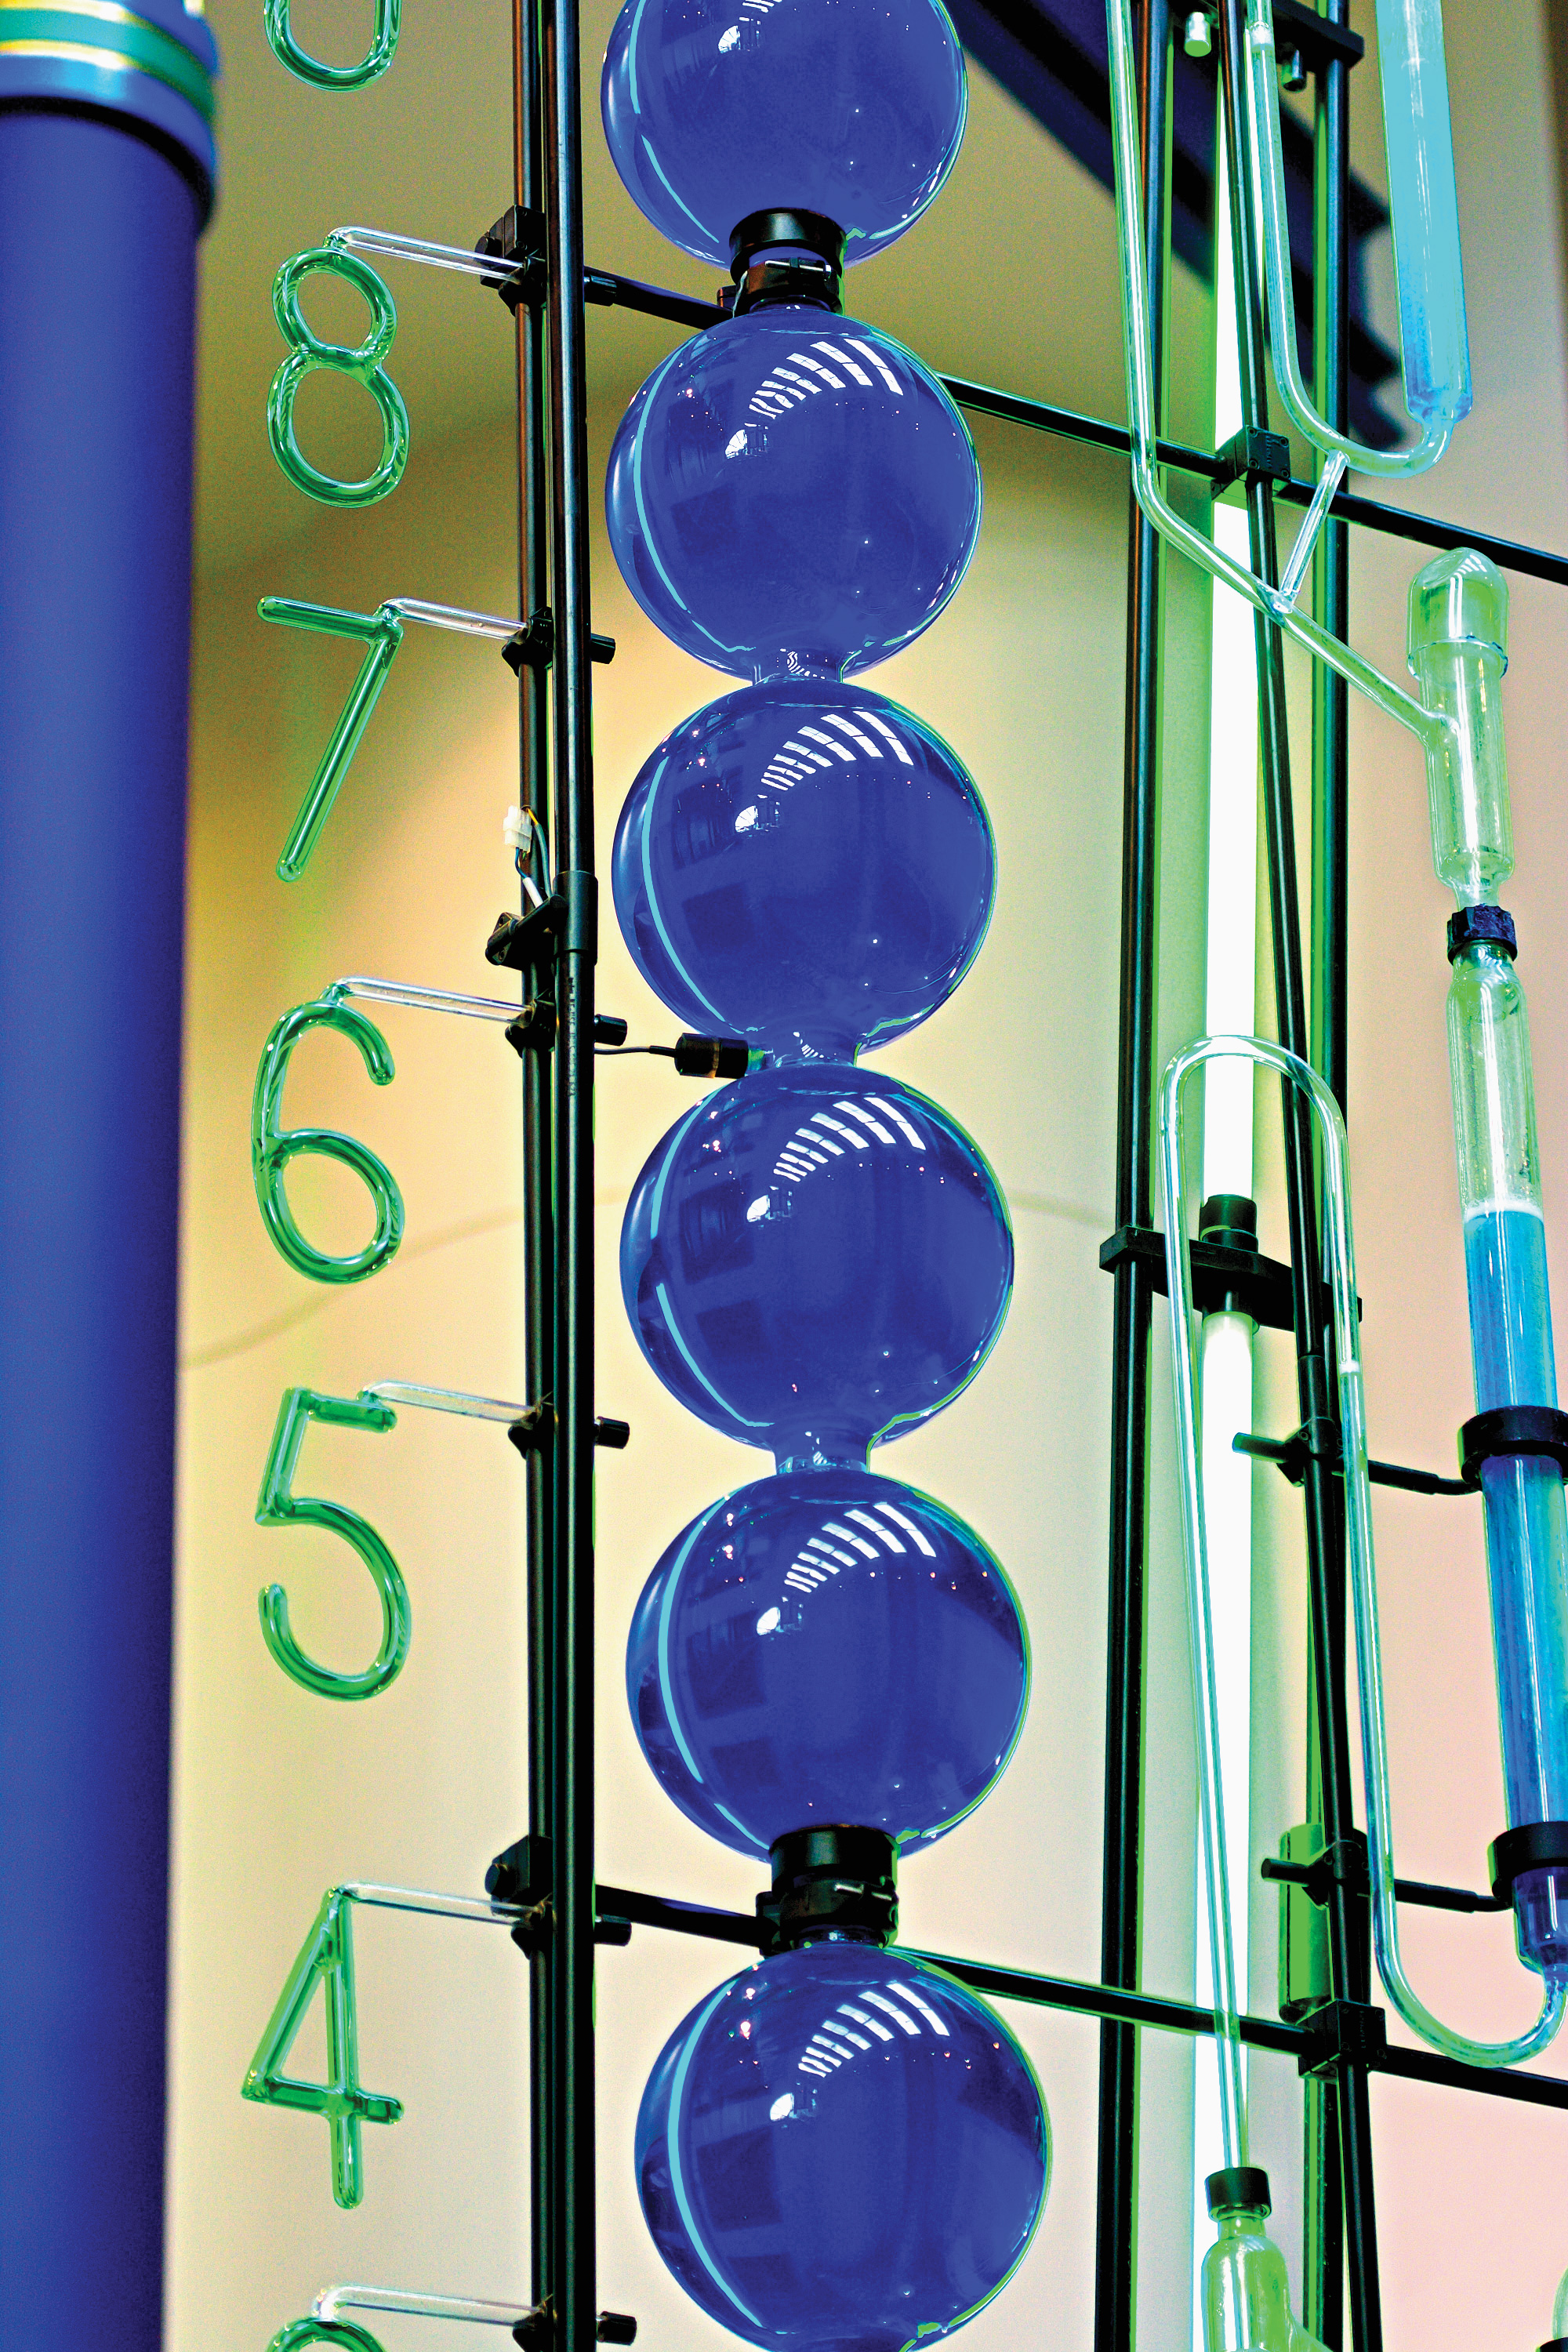 North America's largest water clock can be found at the world's largest children's museum.